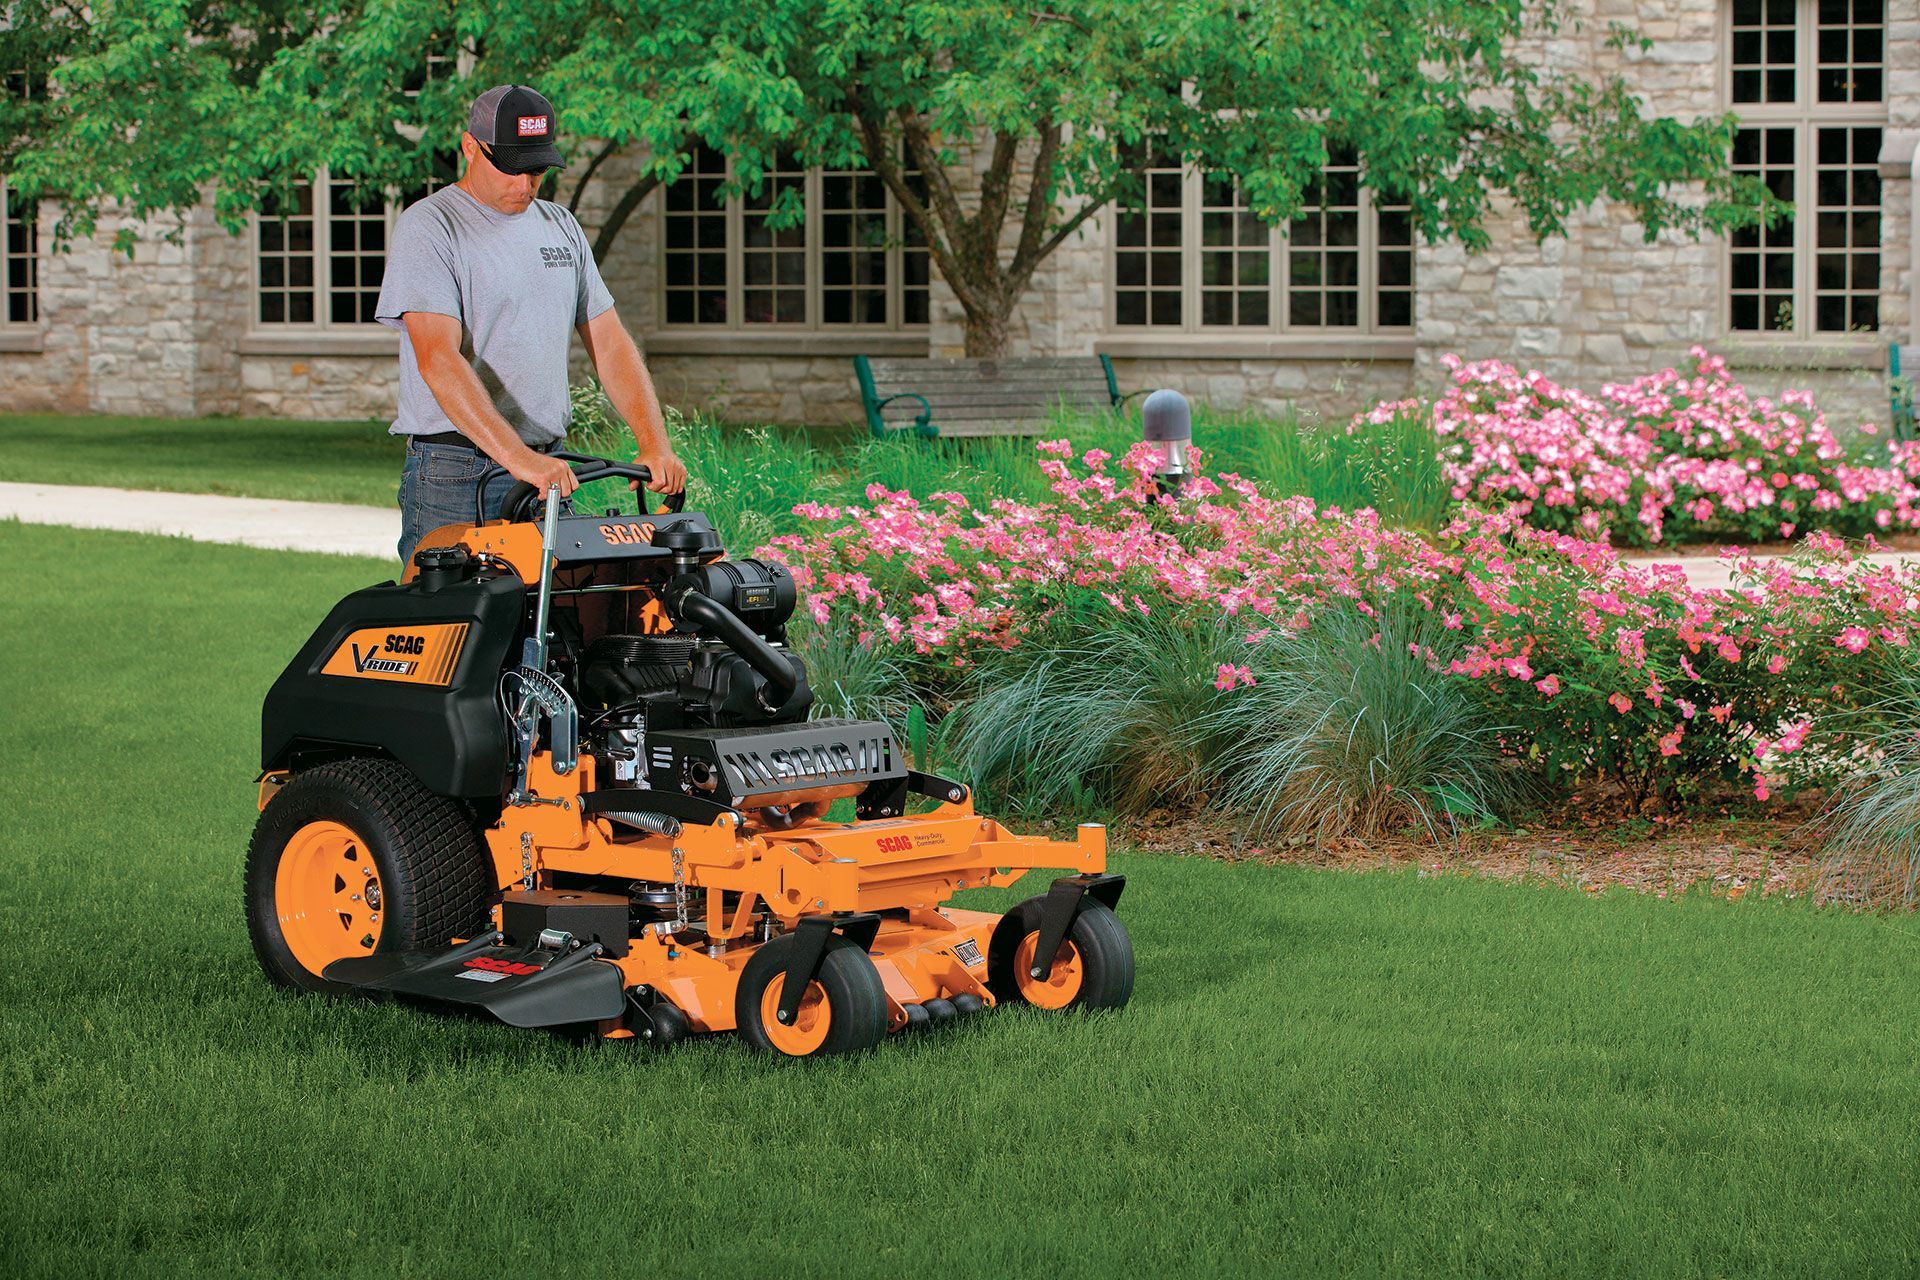 A man is riding a yellow and black lawn mower on a lush green lawn.